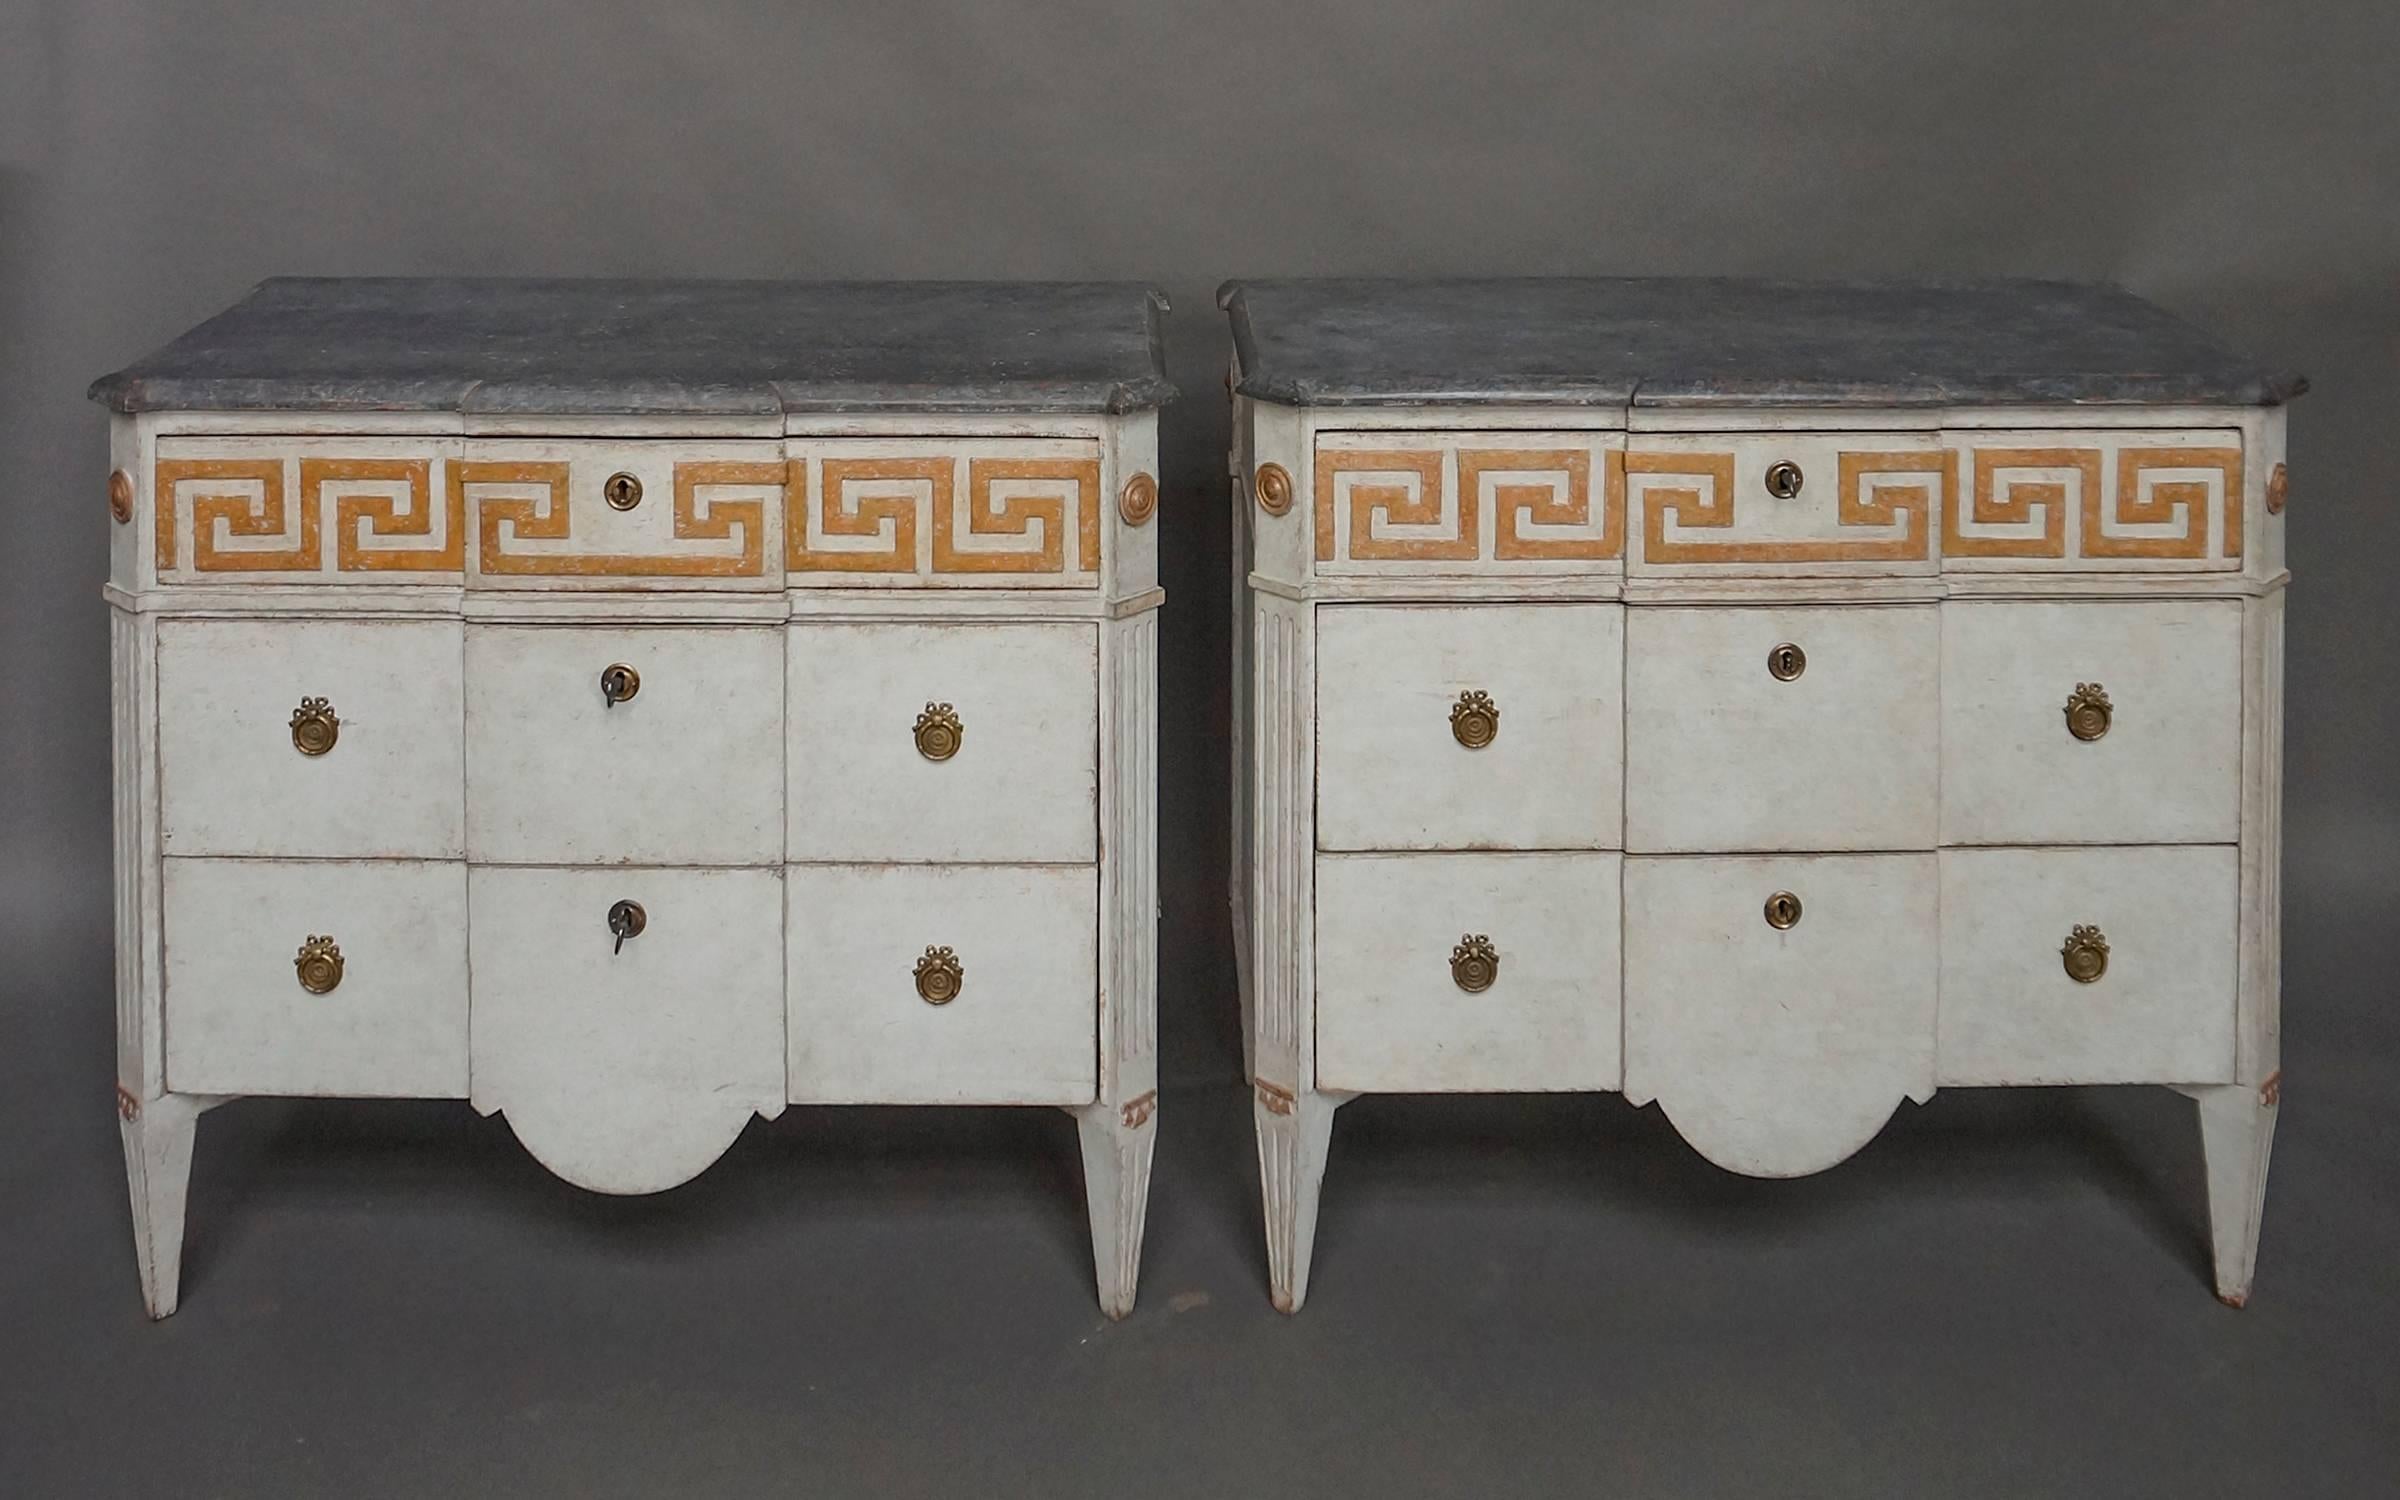 Pair of Swedish commodes, circa 1880, with paneled facade, the top drawers having raised Greek key molding. Shaped top and canted corners with rondels above reeded corner posts and tapered legs. The boldly curved aprons on the bottom drawers add to